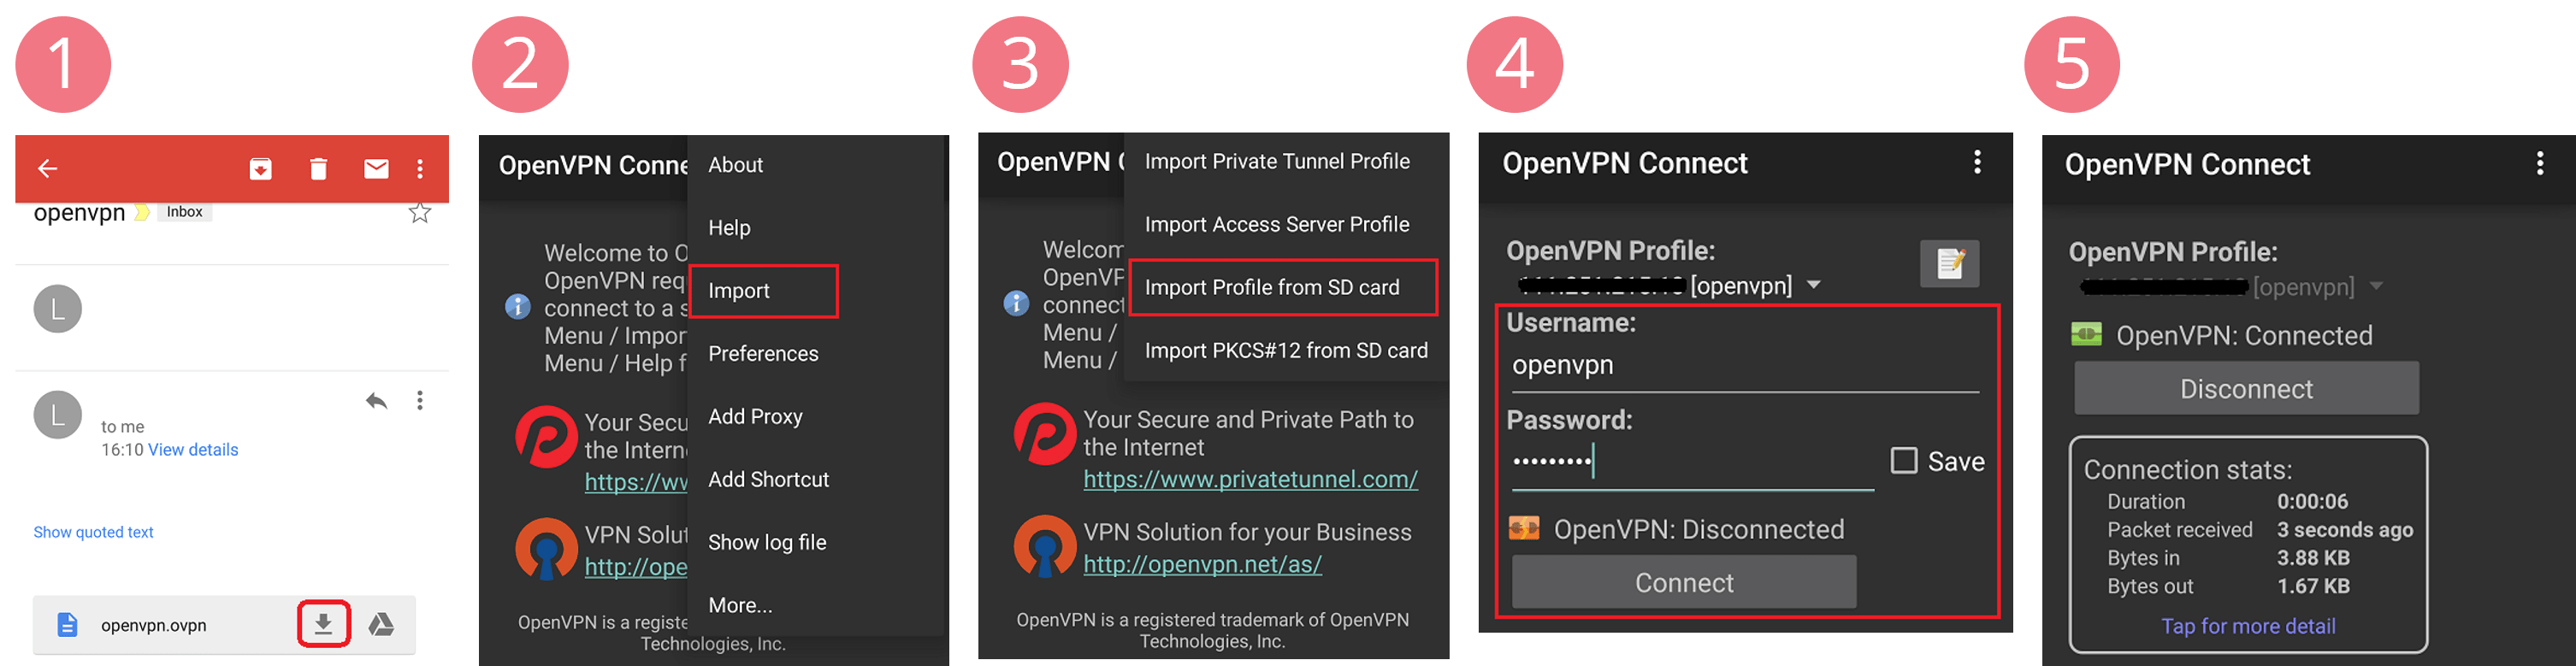 скриншоты Android OpenVPN connect